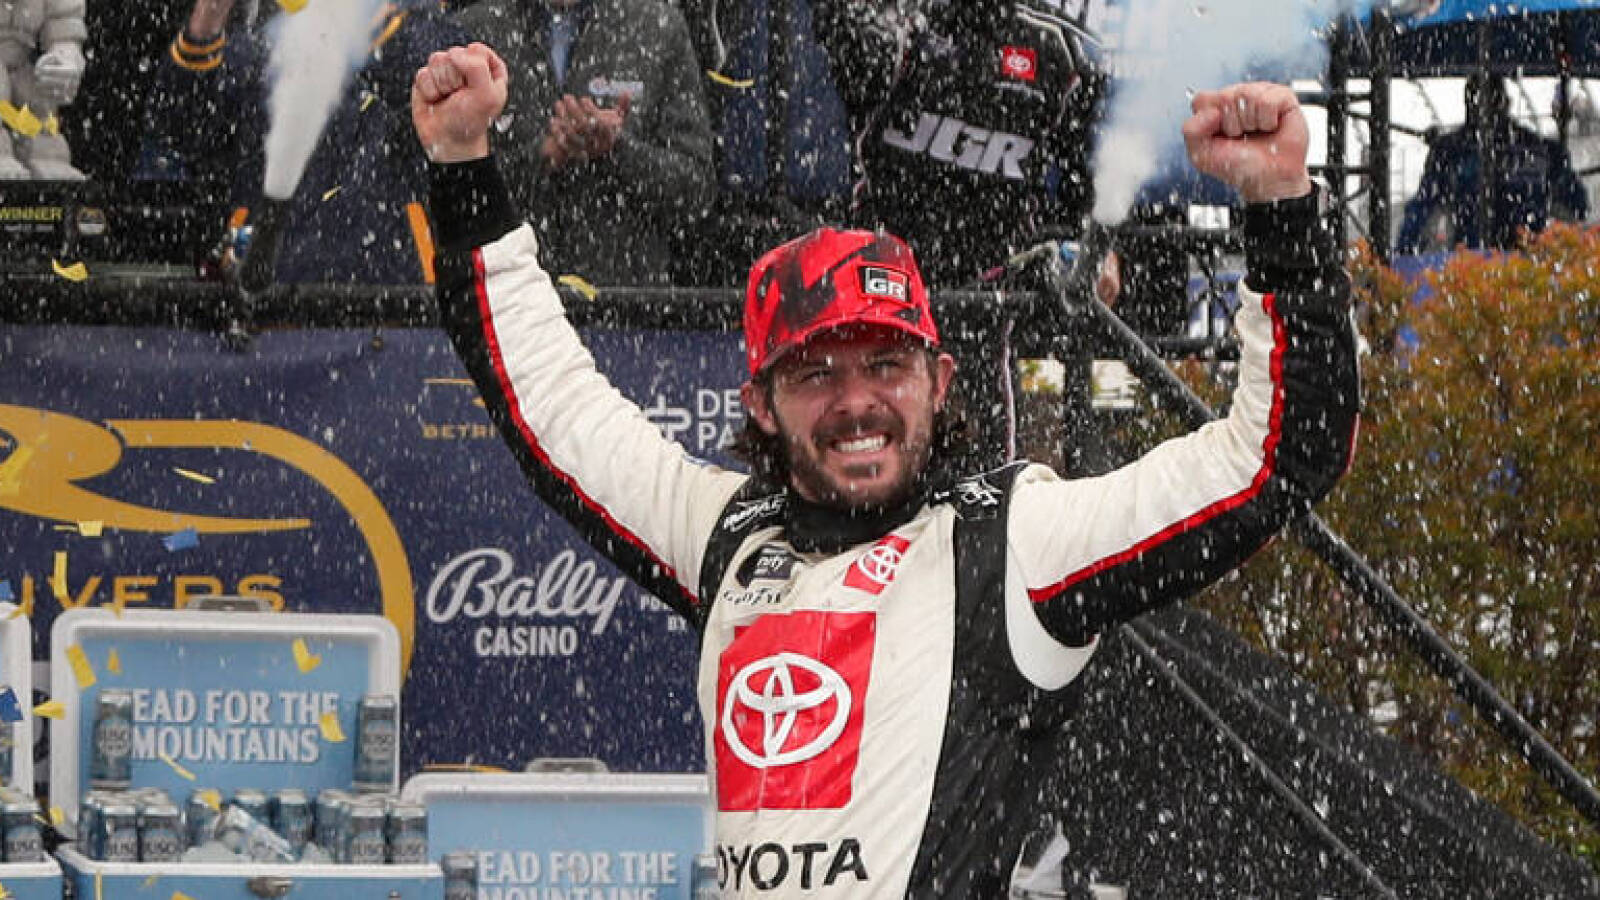 With Dover win, Ryan Truex proves he deserves a full-time NASCAR ride